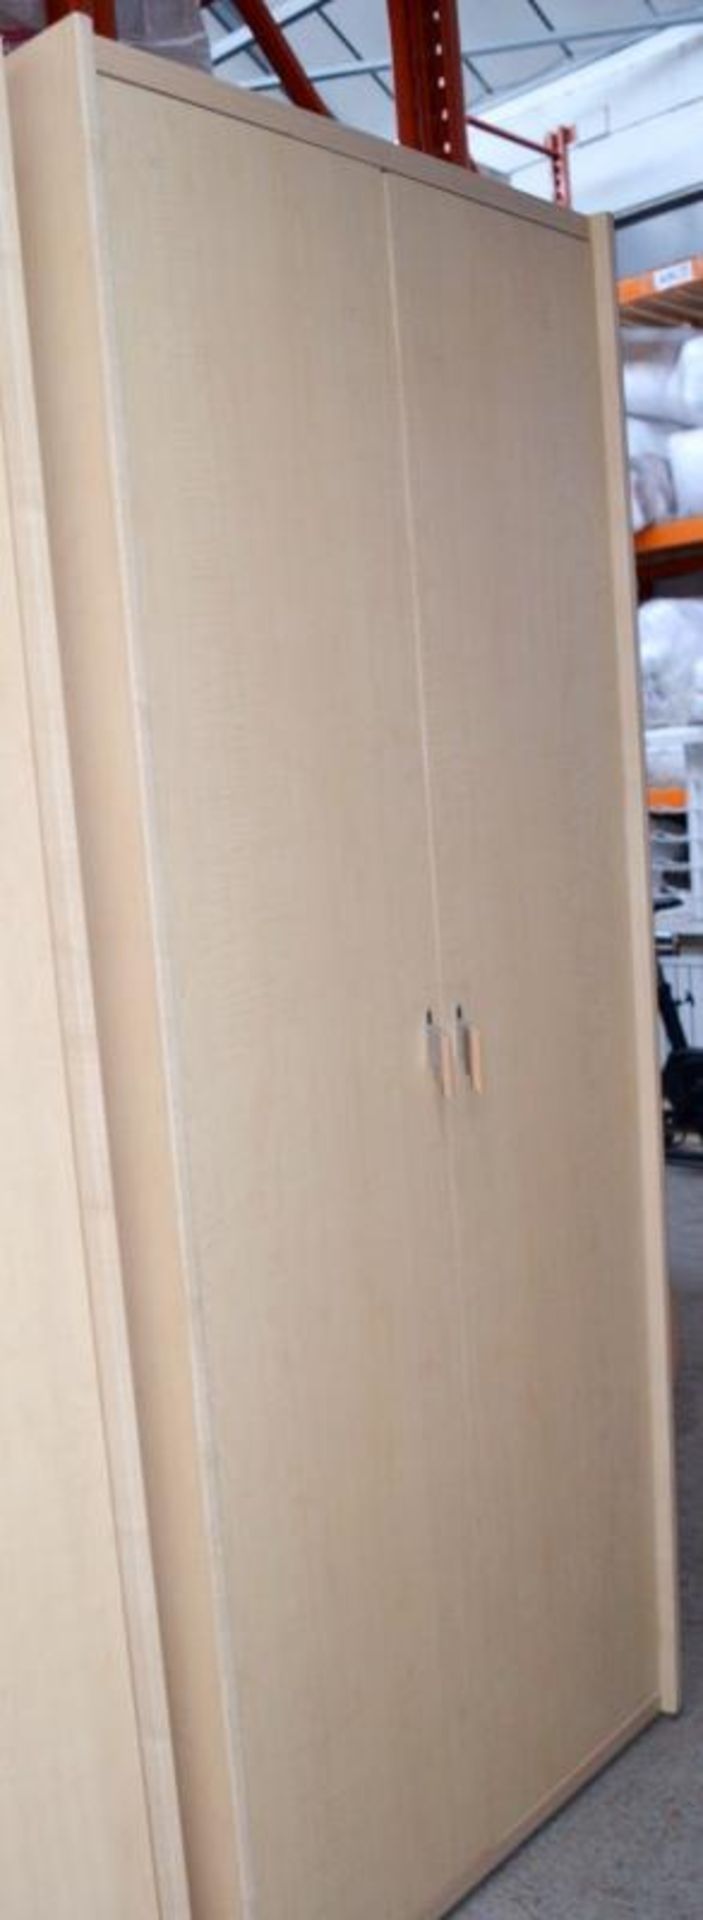 1 x GAUTIER Tall Wardrobe With A Natural Oak Style Finish - Made In France - Dimensions: H222 x W93. - Image 2 of 7